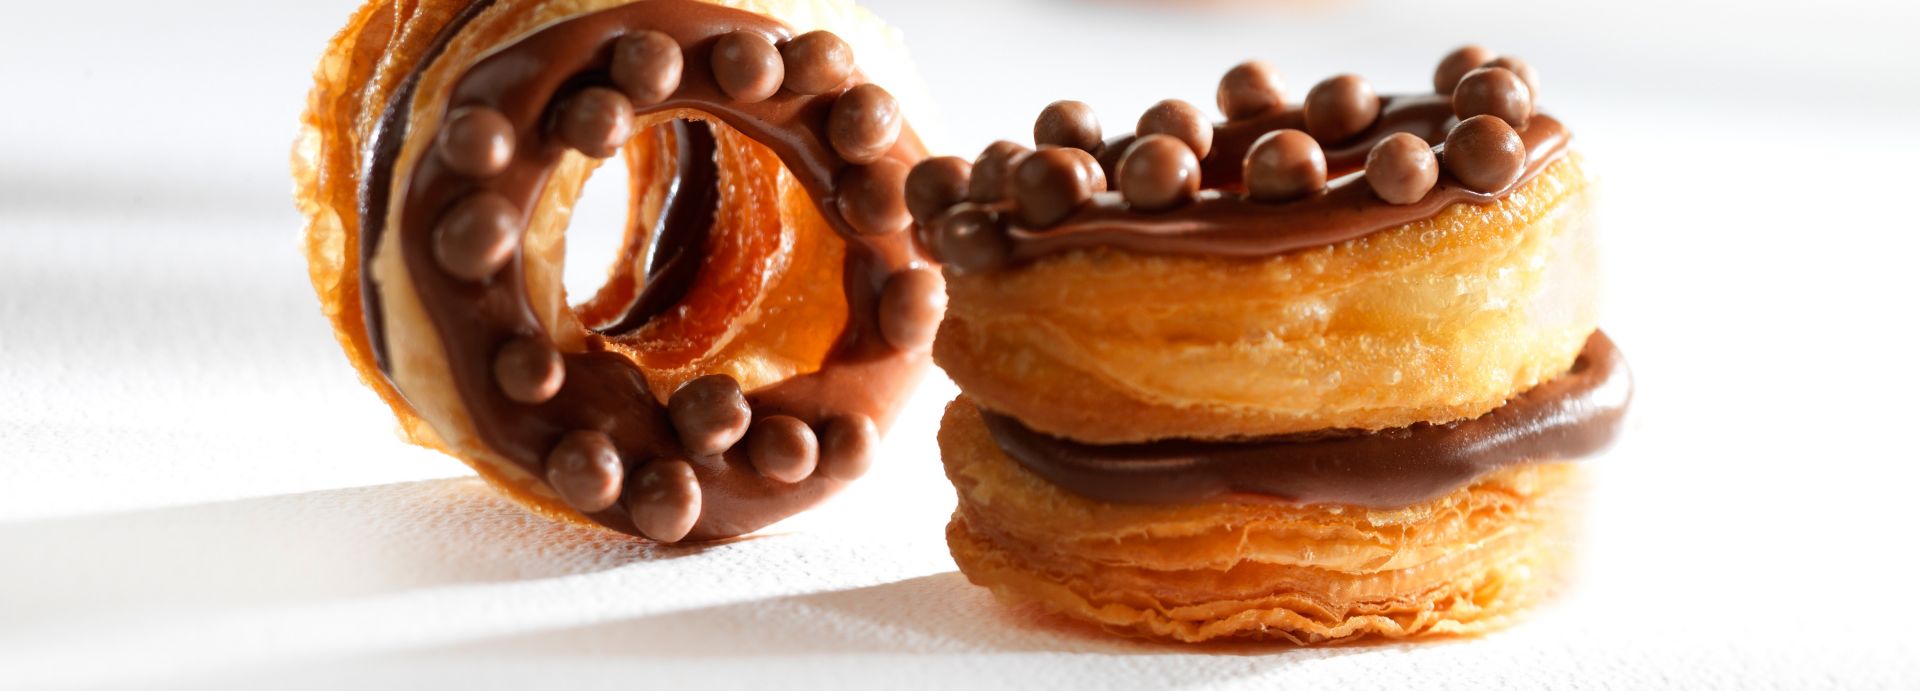 Recipe parts - CHOCRO-DONUT™ with chocolate crémeux